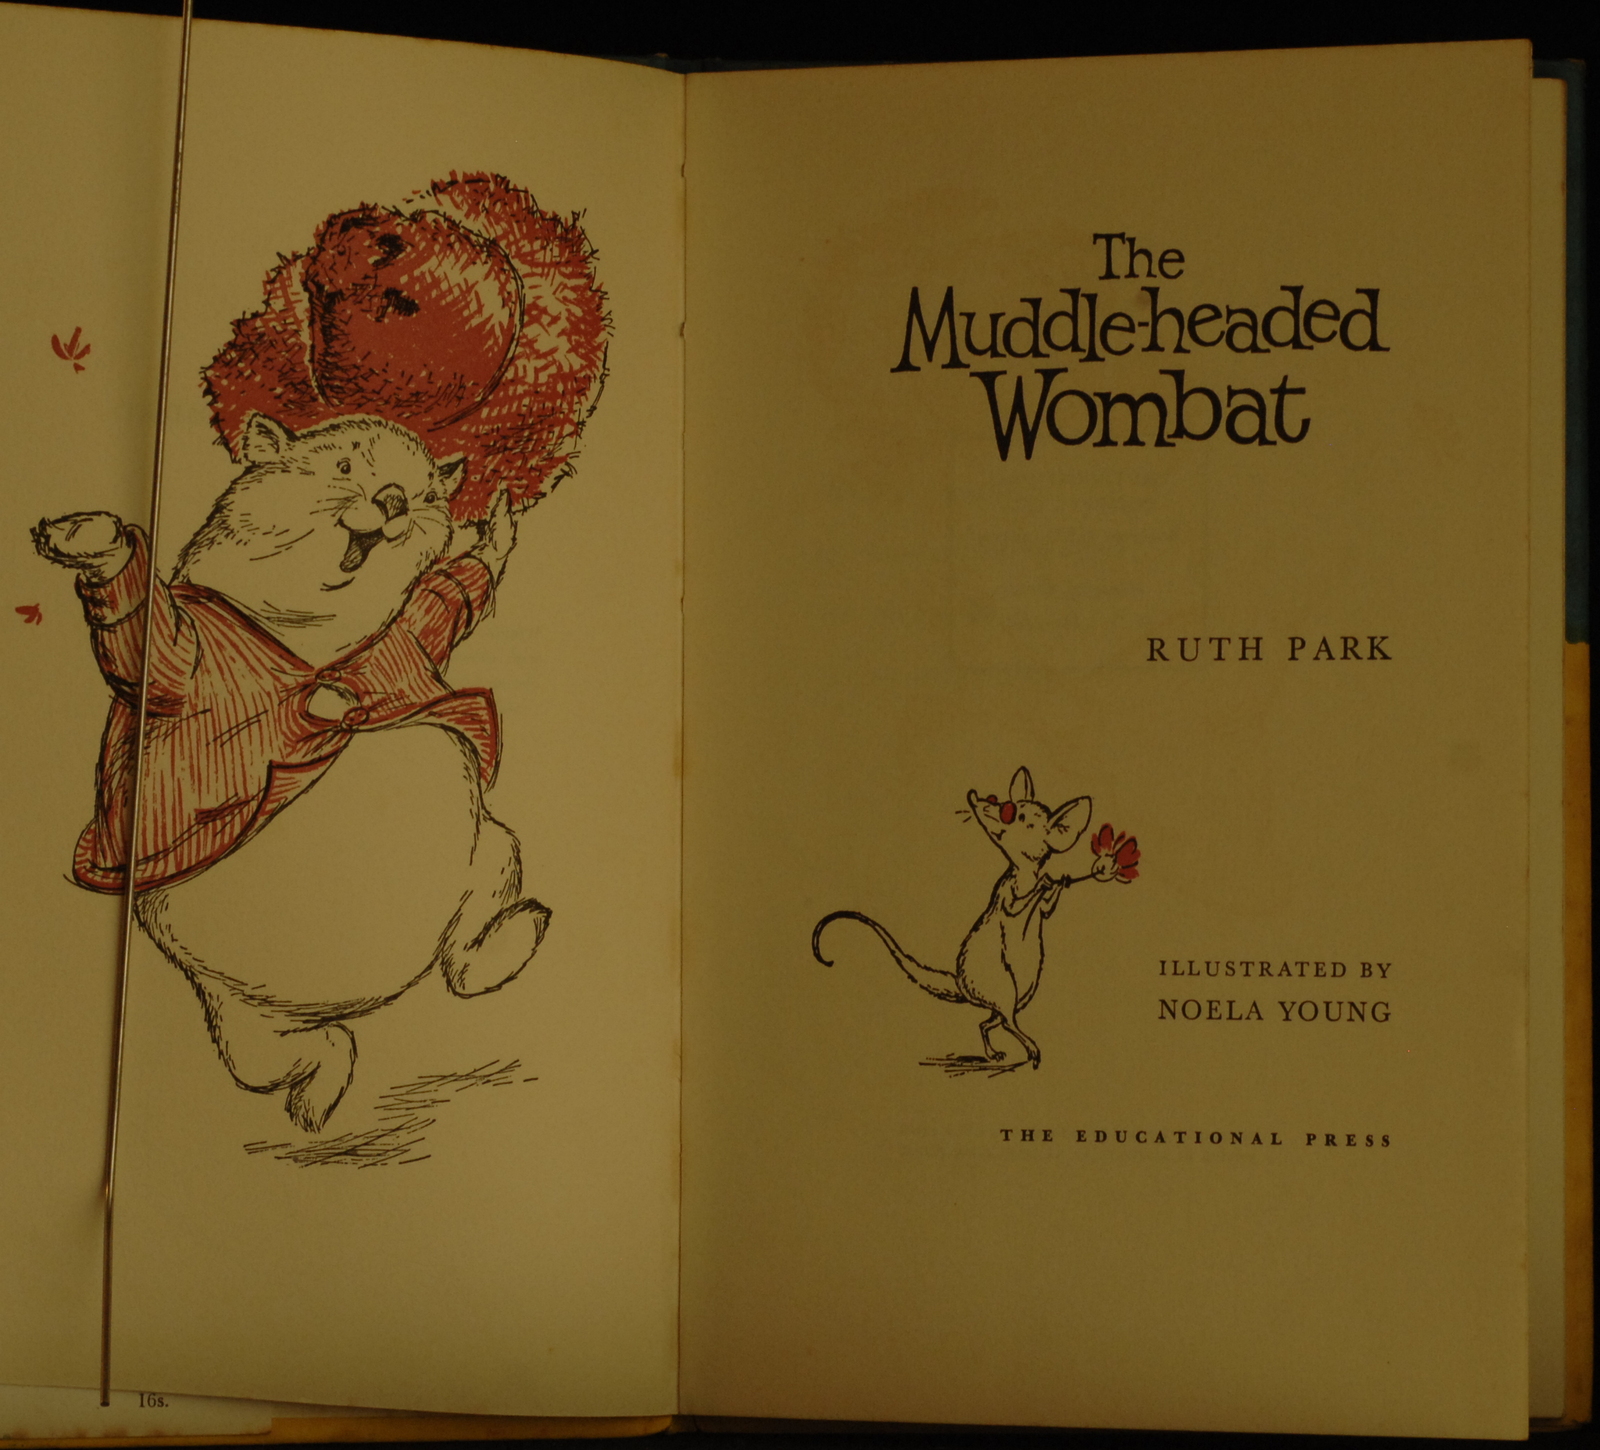 mbb006573d_-_Park_Ruth_-_The_Muddle-Headed_Wombat_-_NOELA_YOUNG.jpg